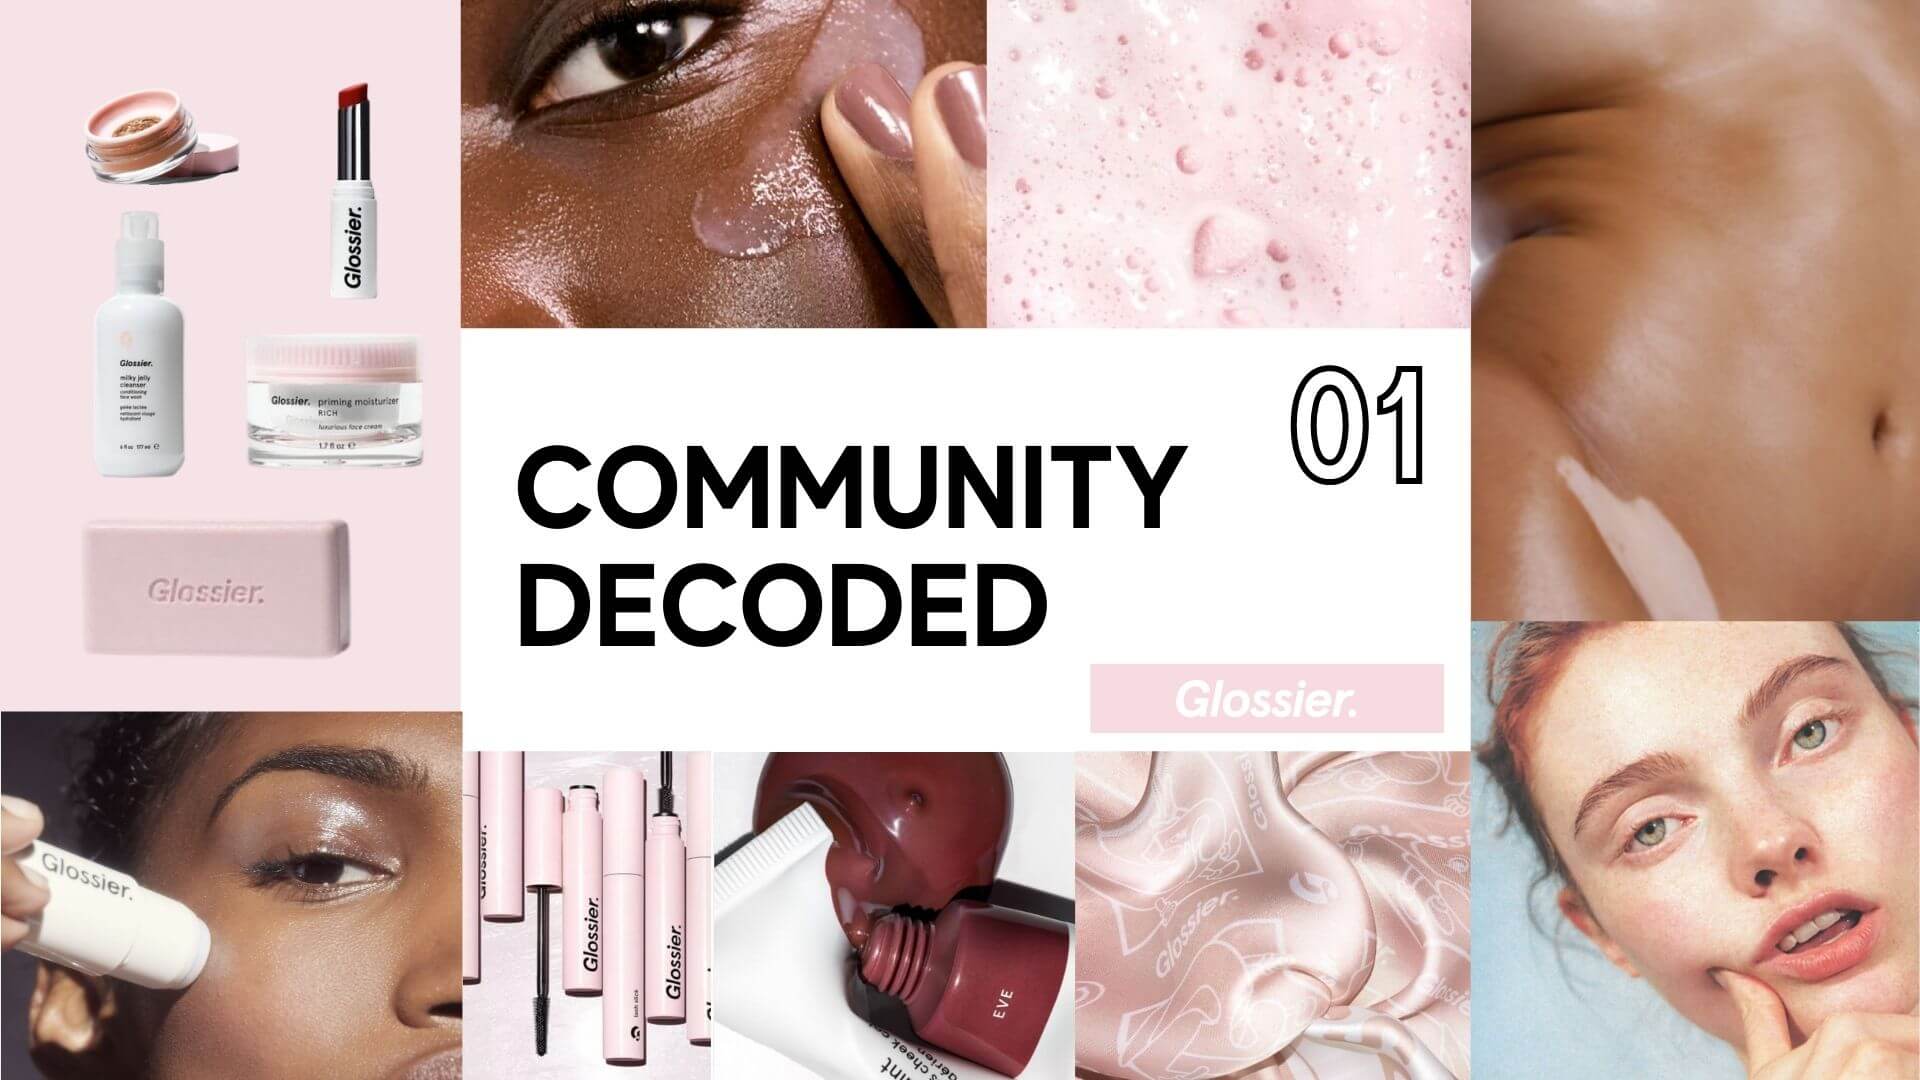 Analyzing the Glossier Brand Community Strategy and 5 Key Tactics that Work